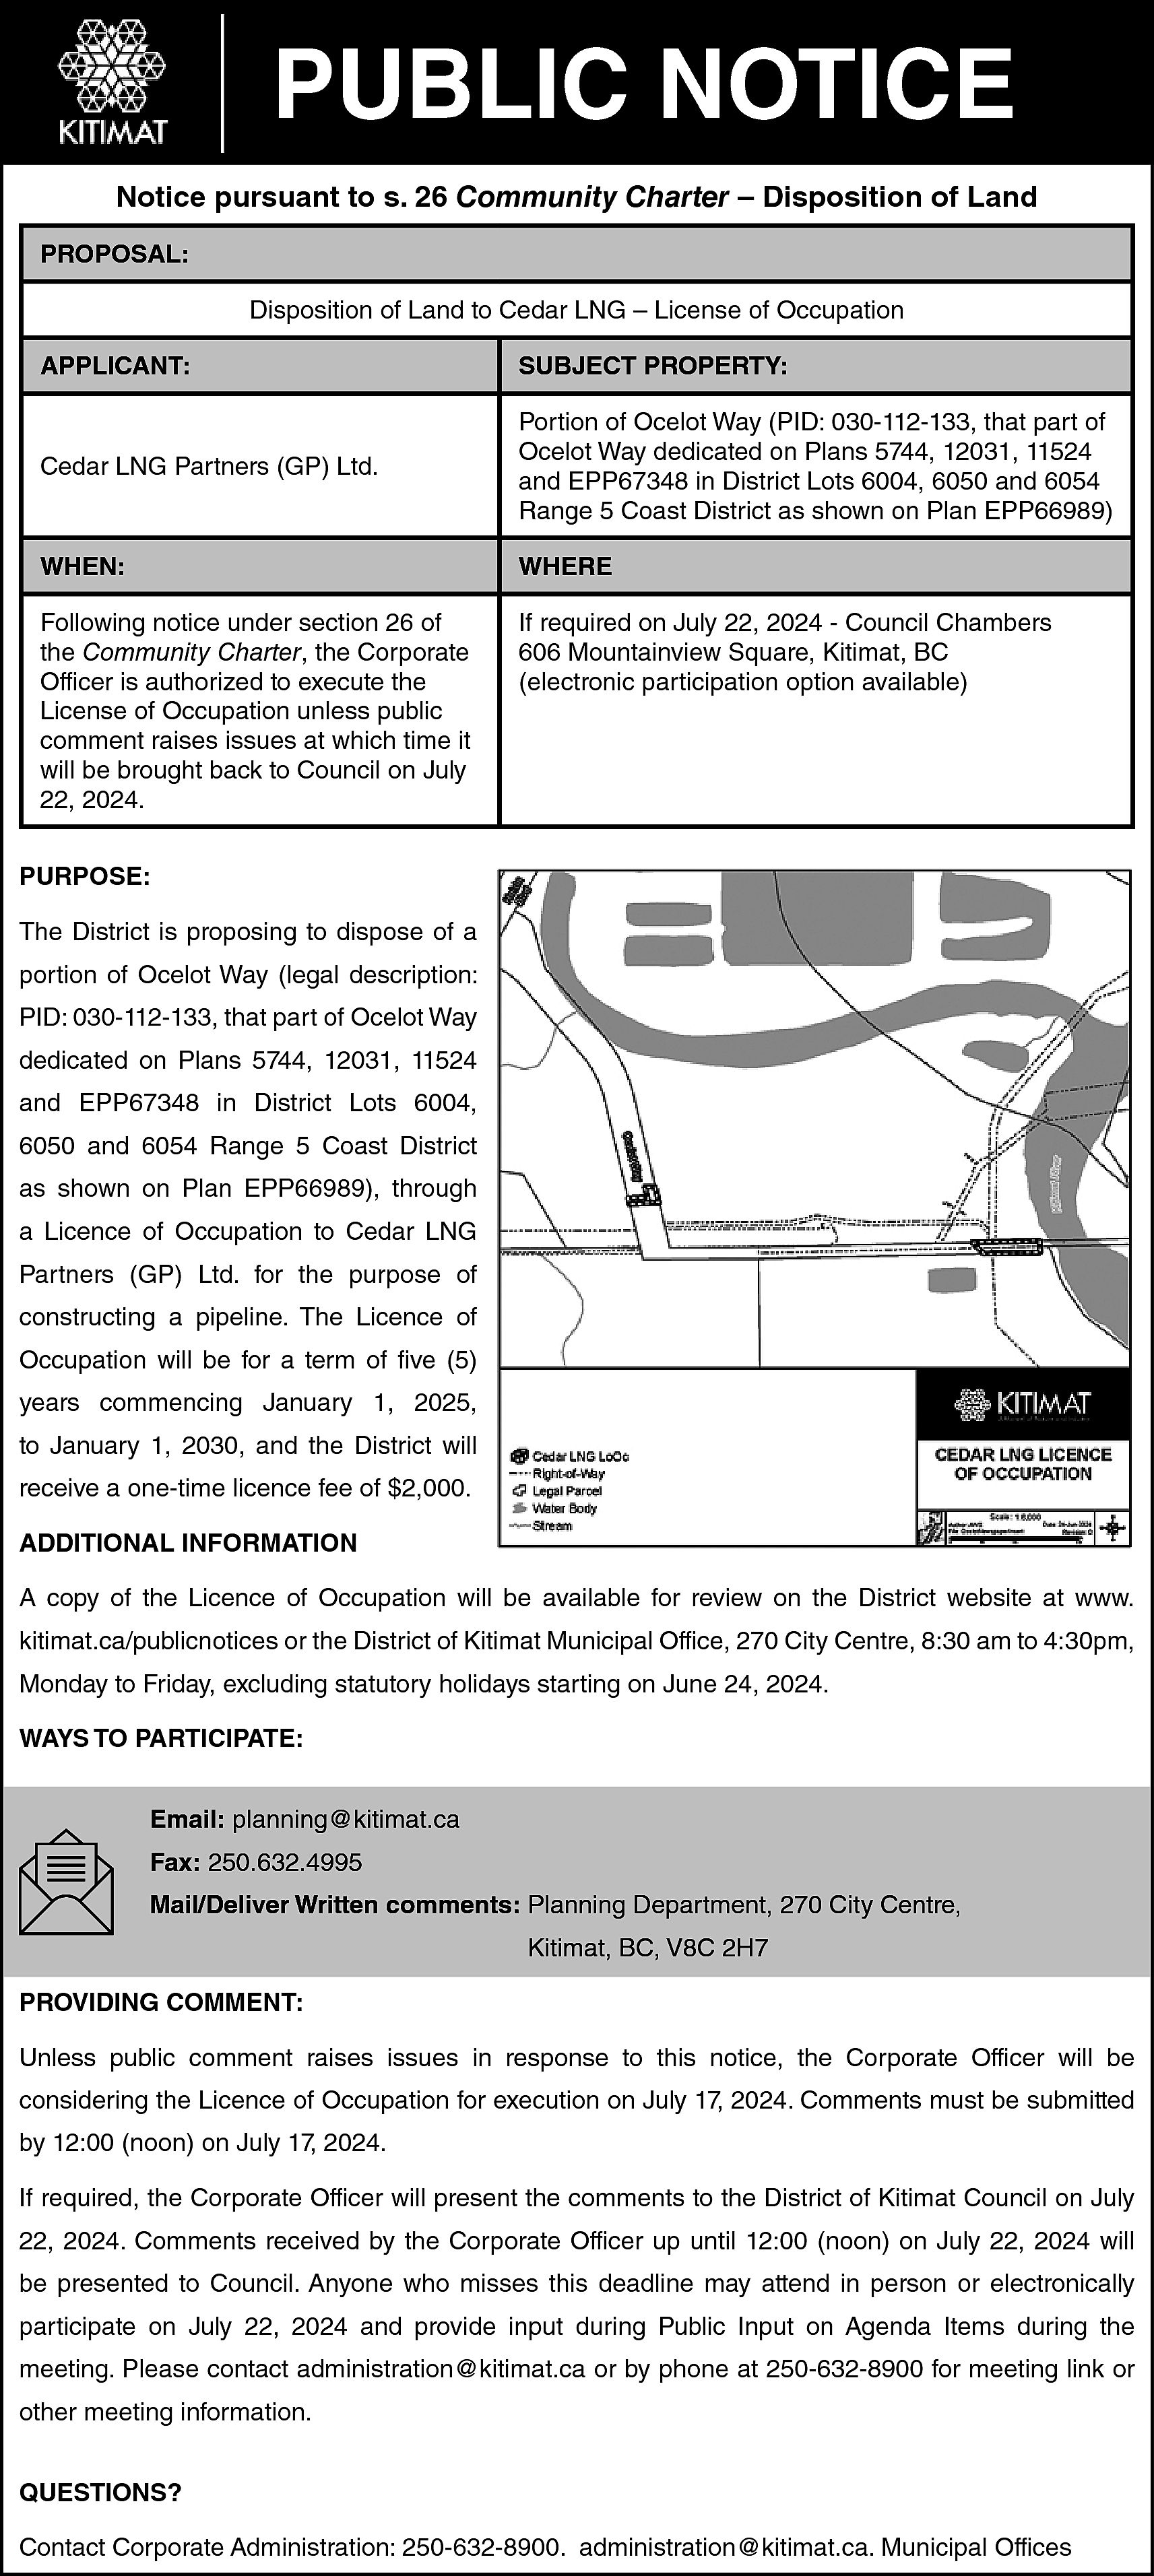 PUBLIC NOTICE <br>Notice pursuant to  PUBLIC NOTICE  Notice pursuant to s. 26 Community Charter – Disposition of Land  PROPOSAL:  Disposition of Land to Cedar LNG – License of Occupation  APPLICANT:    SUBJECT PROPERTY:    Cedar LNG Partners (GP) Ltd.    Portion of Ocelot Way (PID: 030-112-133, that part of  Ocelot Way dedicated on Plans 5744, 12031, 11524  and EPP67348 in District Lots 6004, 6050 and 6054  Range 5 Coast District as shown on Plan EPP66989)    WHEN:    WHERE    Following notice under section 26 of  the Community Charter, the Corporate  Officer is authorized to execute the  License of Occupation unless public  comment raises issues at which time it  will be brought back to Council on July  22, 2024.    If required on July 22, 2024 - Council Chambers  606 Mountainview Square, Kitimat, BC  (electronic participation option available)    PURPOSE:  The District is proposing to dispose of a  portion of Ocelot Way (legal description:  PID: 030-112-133, that part of Ocelot Way  dedicated on Plans 5744, 12031, 11524  and EPP67348 in District Lots 6004,  6050 and 6054 Range 5 Coast District  as shown on Plan EPP66989), through  a Licence of Occupation to Cedar LNG  Partners (GP) Ltd. for the purpose of  constructing a pipeline. The Licence of  Occupation will be for a term of five (5)  years commencing January 1, 2025,  to January 1, 2030, and the District will  receive a one-time licence fee of $2,000.  ADDITIONAL INFORMATION  A copy of the Licence of Occupation will be available for review on the District website at www.  kitimat.ca/publicnotices or the District of Kitimat Municipal Office, 270 City Centre, 8:30 am to 4:30pm,  Monday to Friday, excluding statutory holidays starting on June 24, 2024.  WAYS TO PARTICIPATE:  Email: planning@kitimat.ca  Fax: 250.632.4995  Mail/Deliver Written comments: Planning Department, 270 City Centre,  Kitimat, BC, V8C 2H7  PROVIDING COMMENT:  Unless public comment raises issues in response to this notice, the Corporate Officer will be  considering the Licence of Occupation for execution on July 17, 2024. Comments must be submitted  by 12:00 (noon) on July 17, 2024.  If required, the Corporate Officer will present the comments to the District of Kitimat Council on July  22, 2024. Comments received by the Corporate Officer up until 12:00 (noon) on July 22, 2024 will  be presented to Council. Anyone who misses this deadline may attend in person or electronically  participate on July 22, 2024 and provide input during Public Input on Agenda Items during the  meeting. Please contact administration@kitimat.ca or by phone at 250-632-8900 for meeting link or  other meeting information.  QUESTIONS?  Contact Corporate Administration: 250-632-8900. administration@kitimat.ca. Municipal Offices    